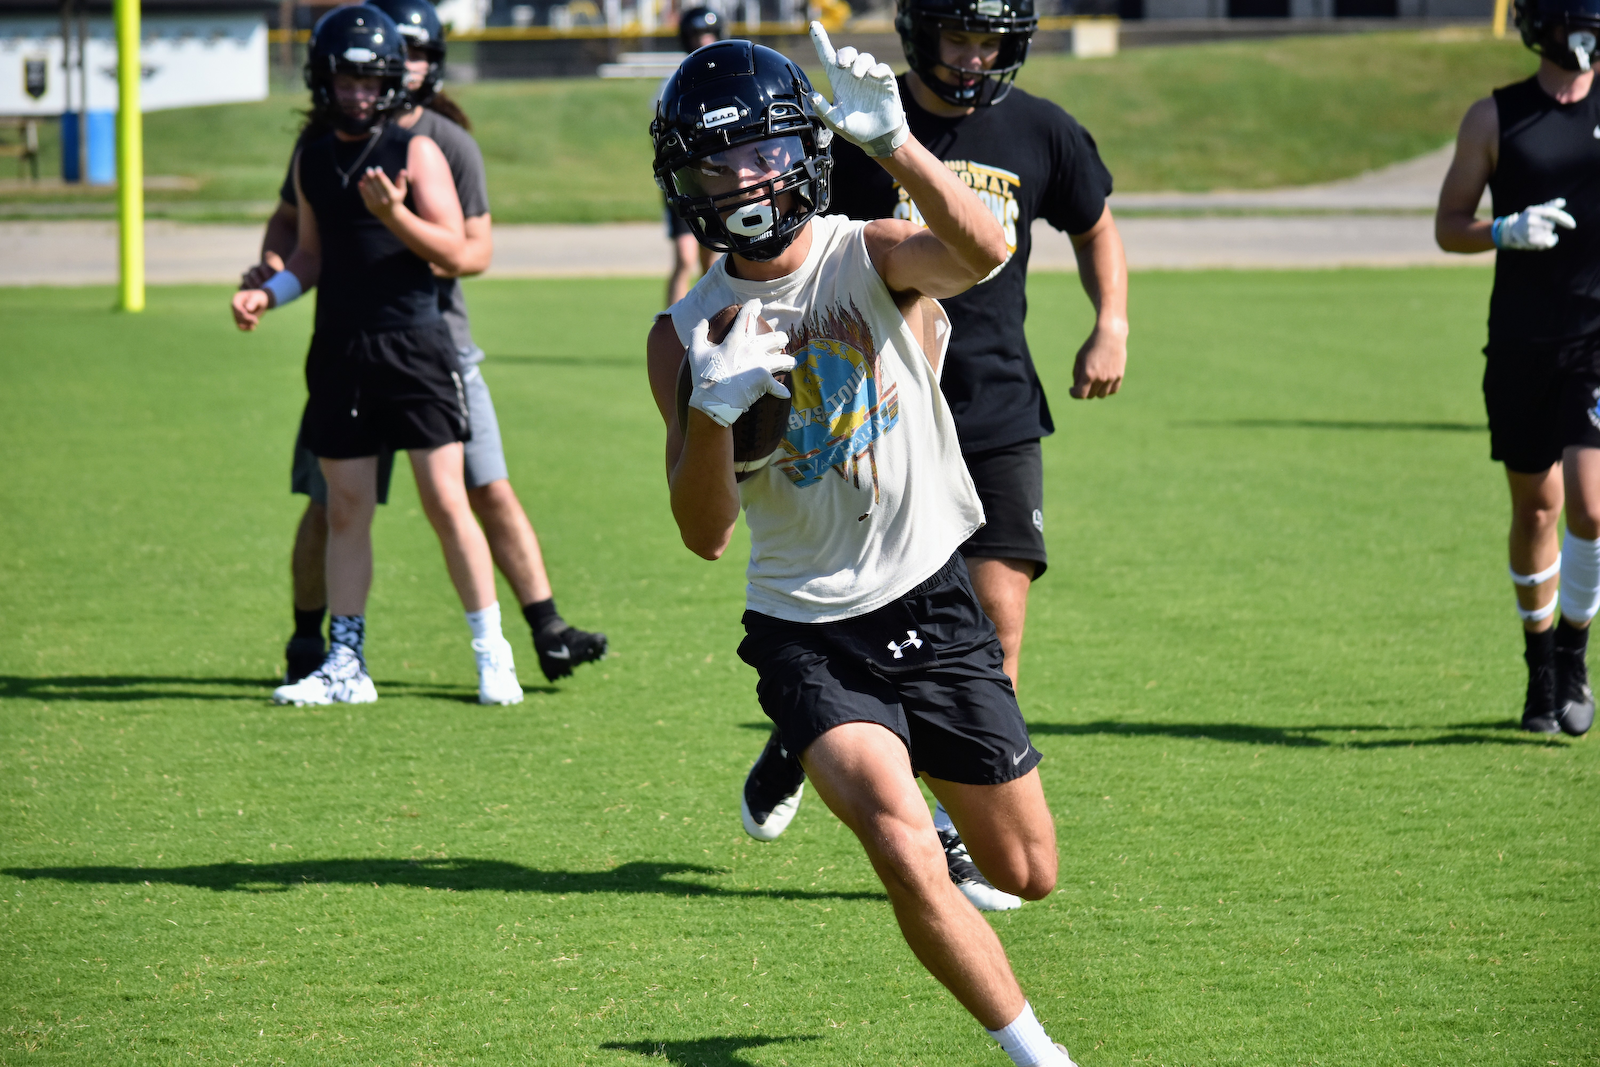 Springs Valley Football Intrasquad 7-on-7 gallery cover photo